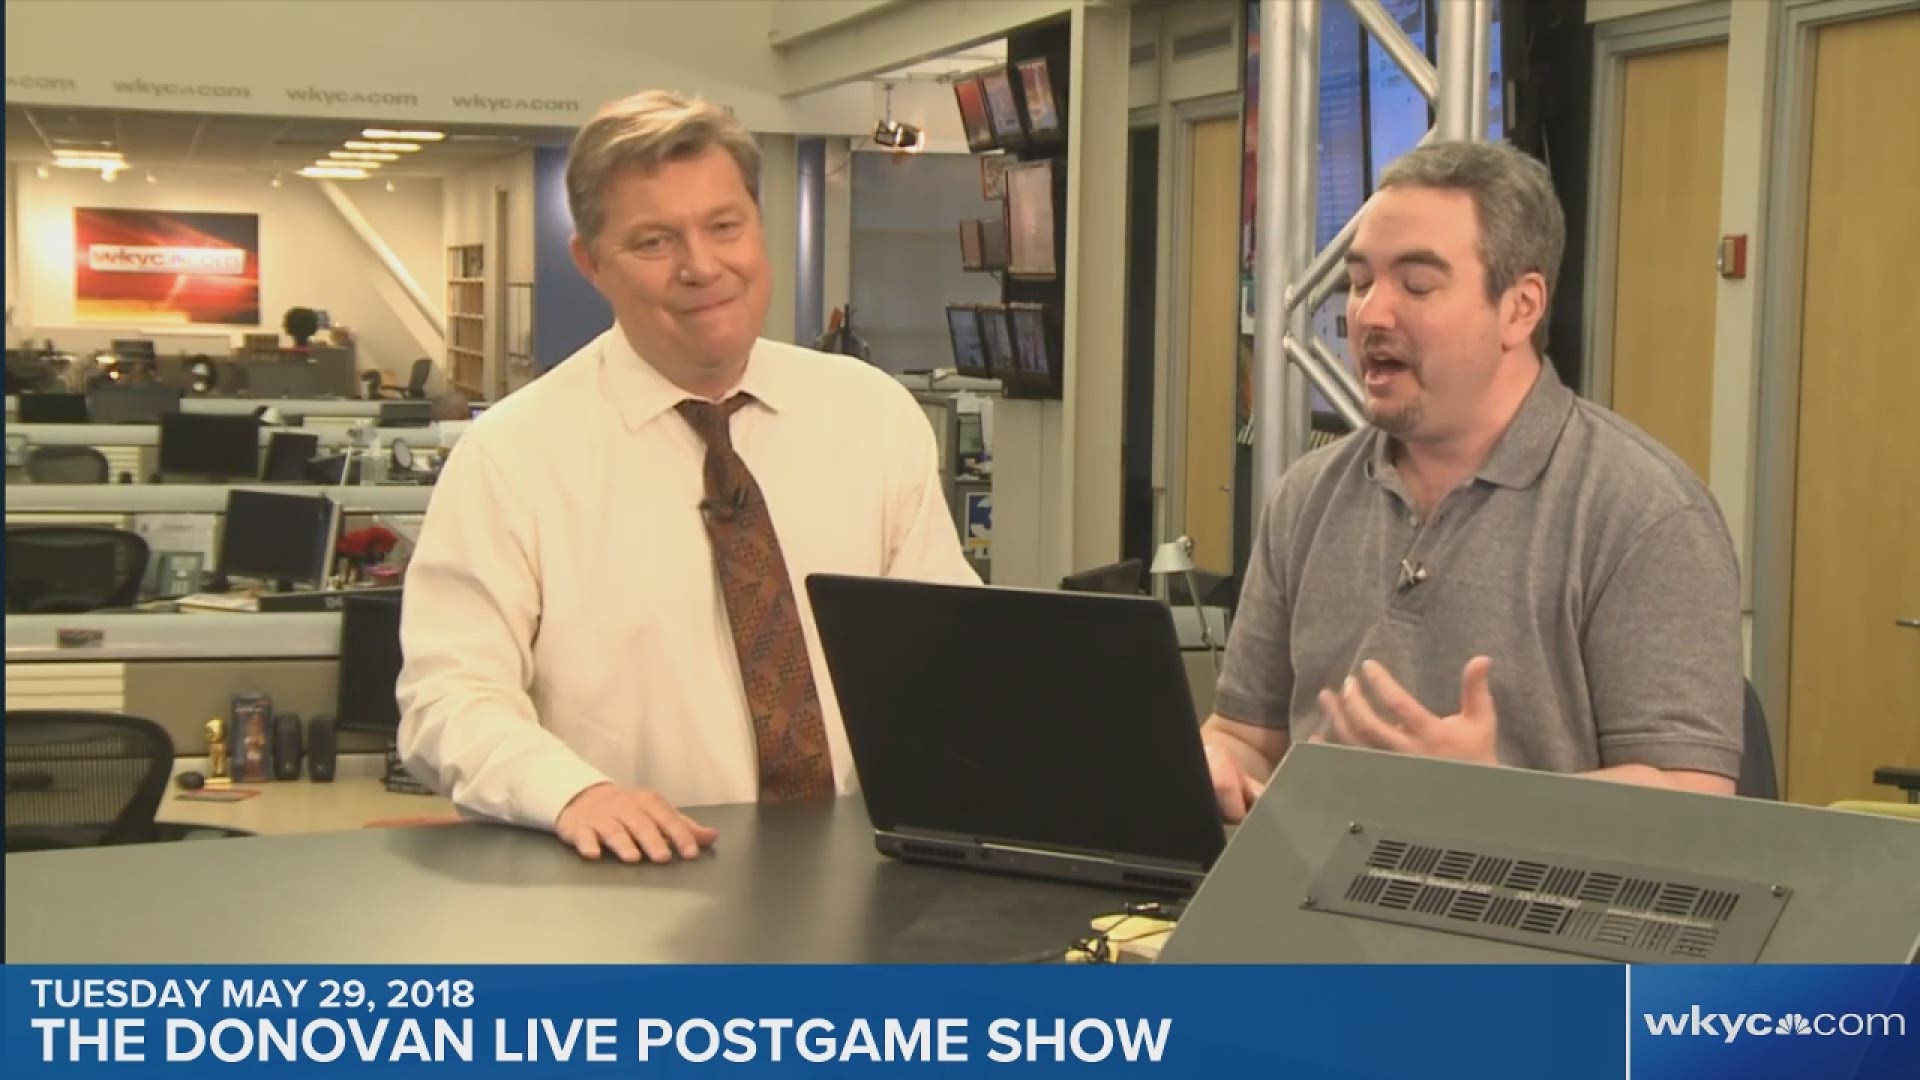 Can the Cavaliers climb Mt. Everest and beat Golden State? The Donovan Live Postgame Show